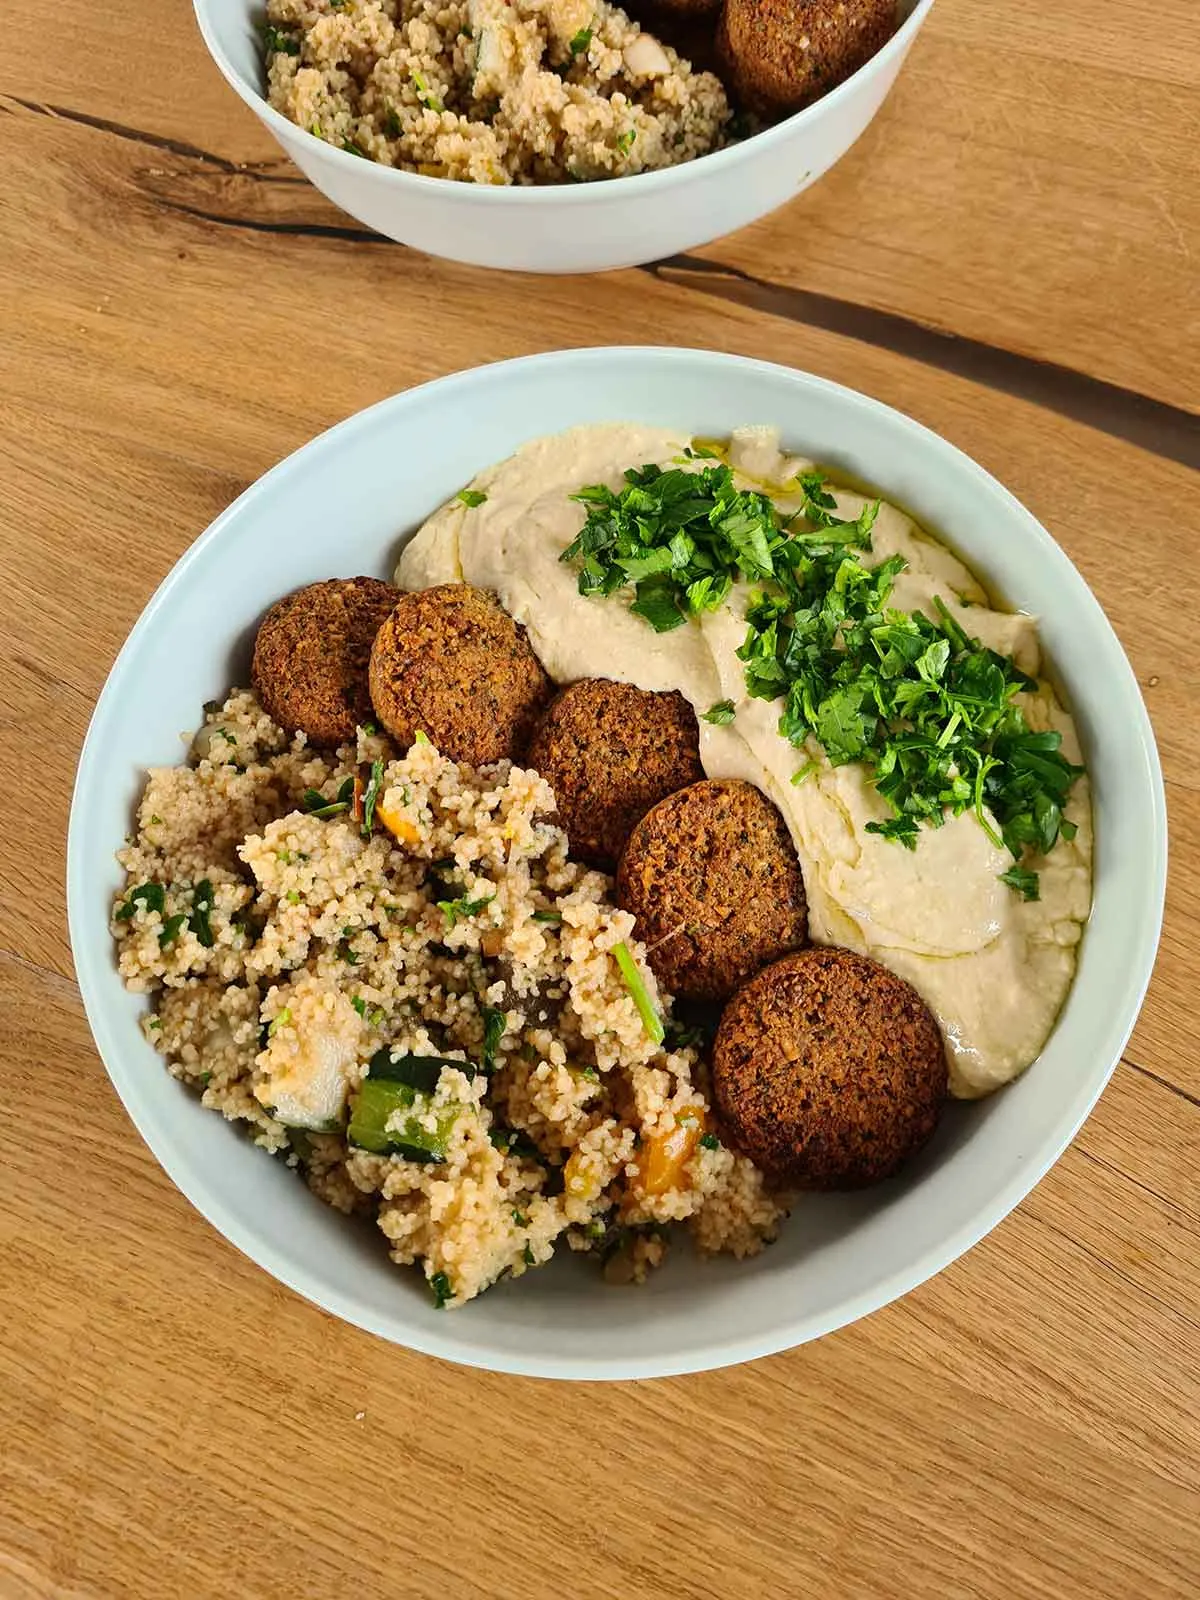 Baked falafel with homemade hummus and couscous recipe Cuscus cu falafel copt si humus